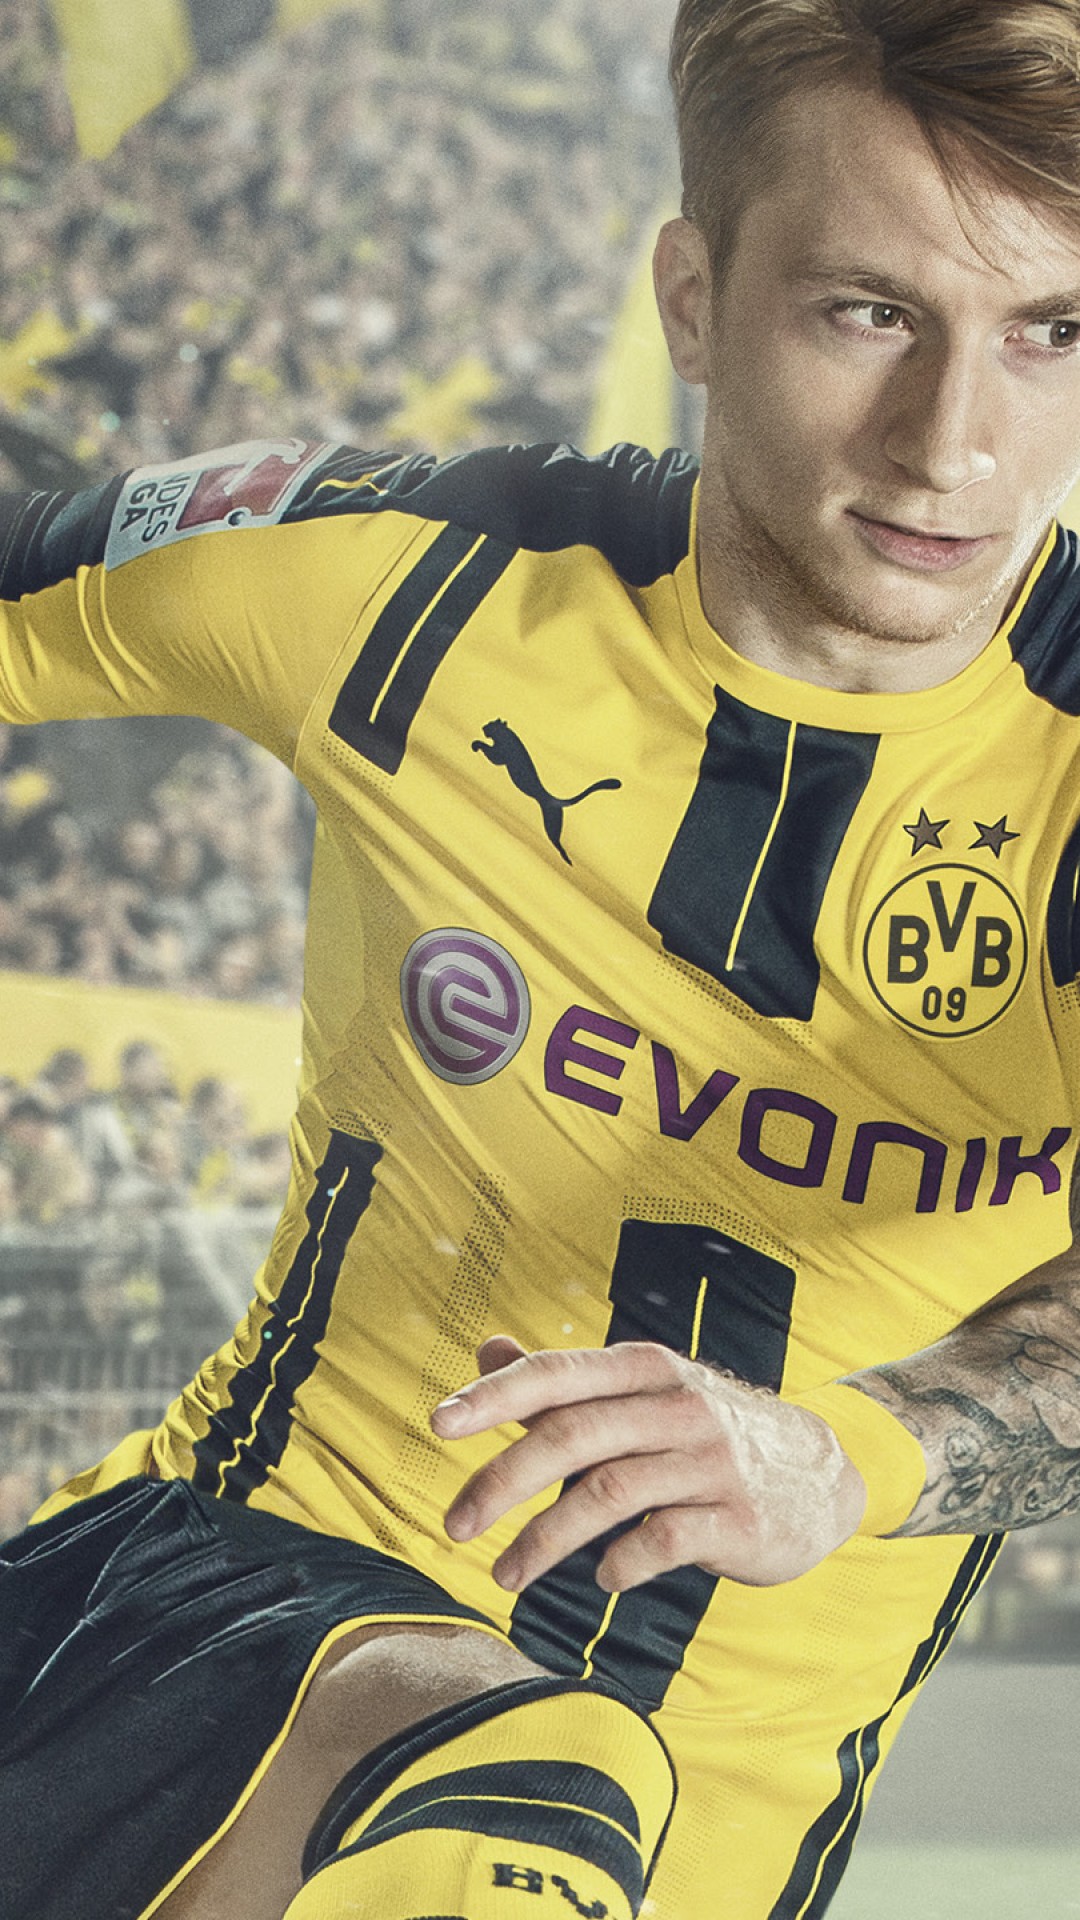 About: Marco Reus Wallpapers 4K HD BVB Fans (Google Play version) | |  Apptopia